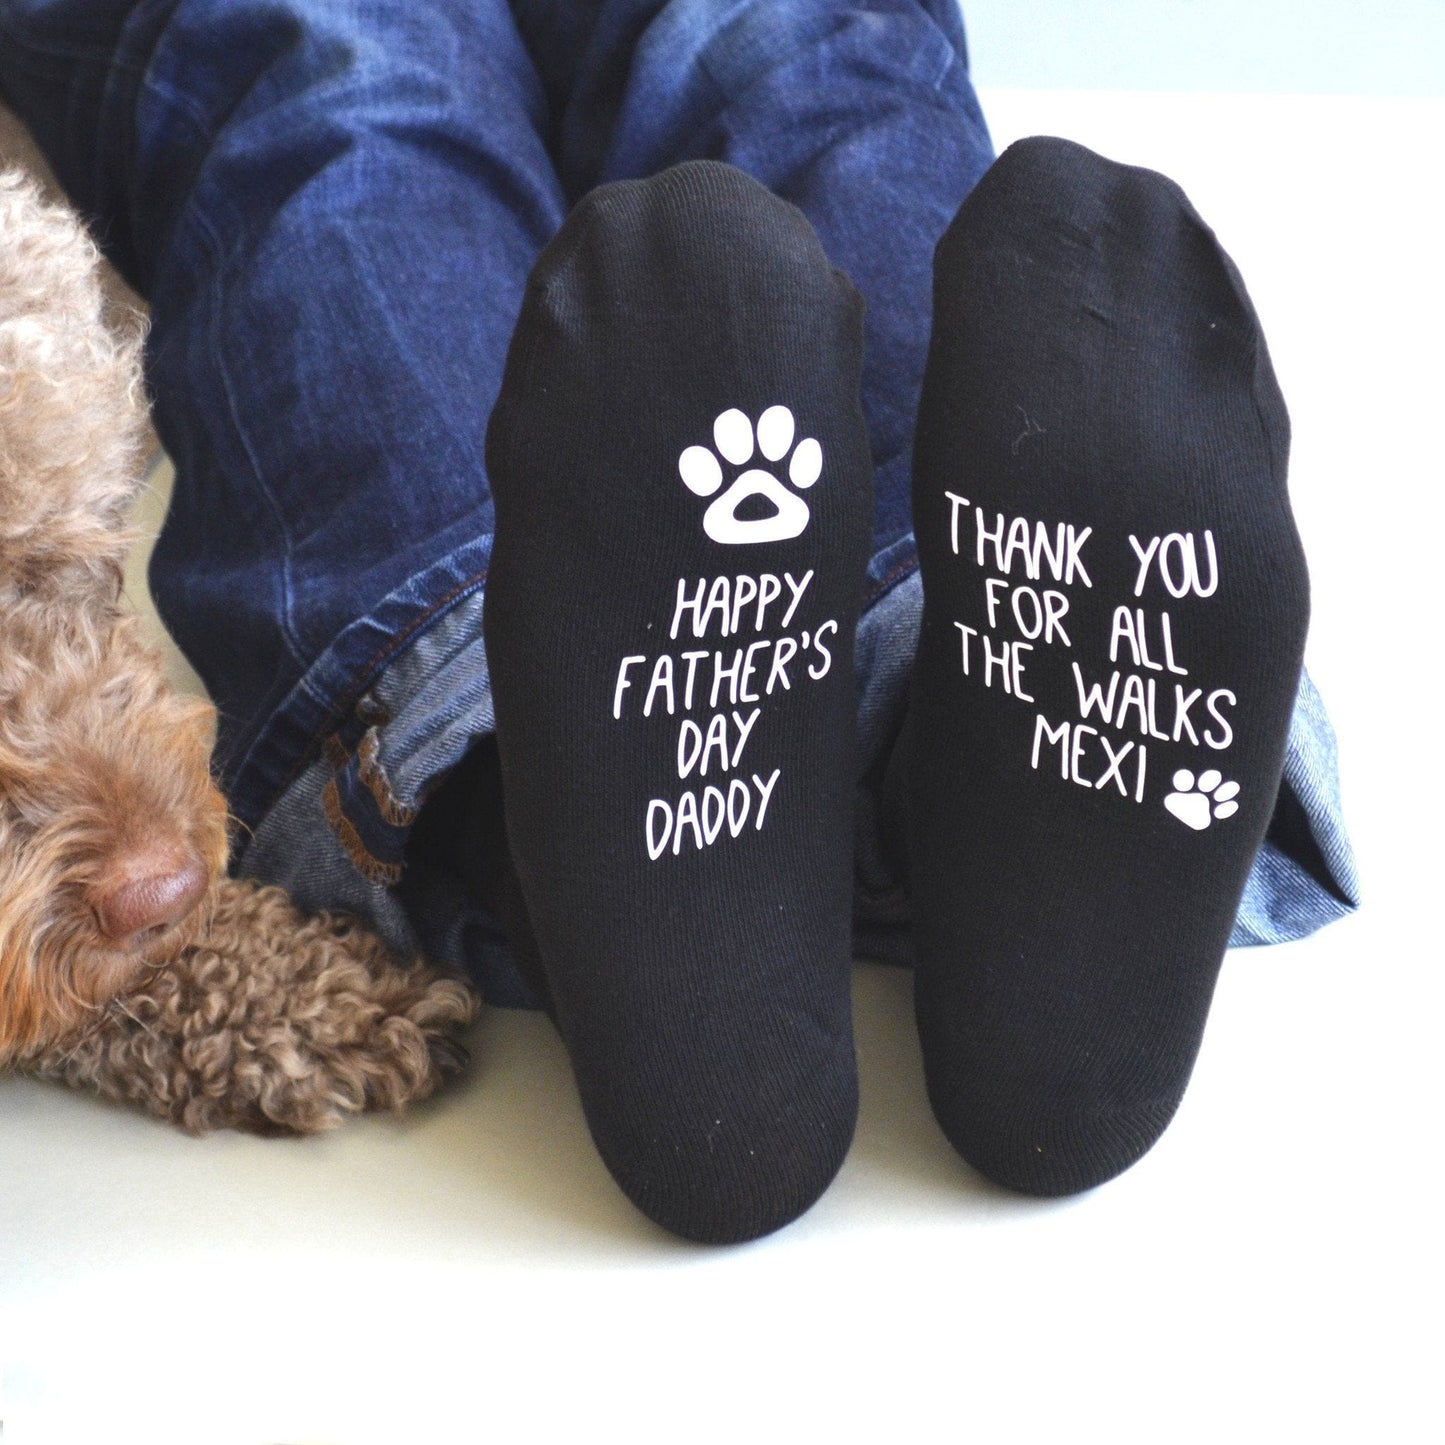 Father's Day Socks From The Dog, socks, - ALPHS 